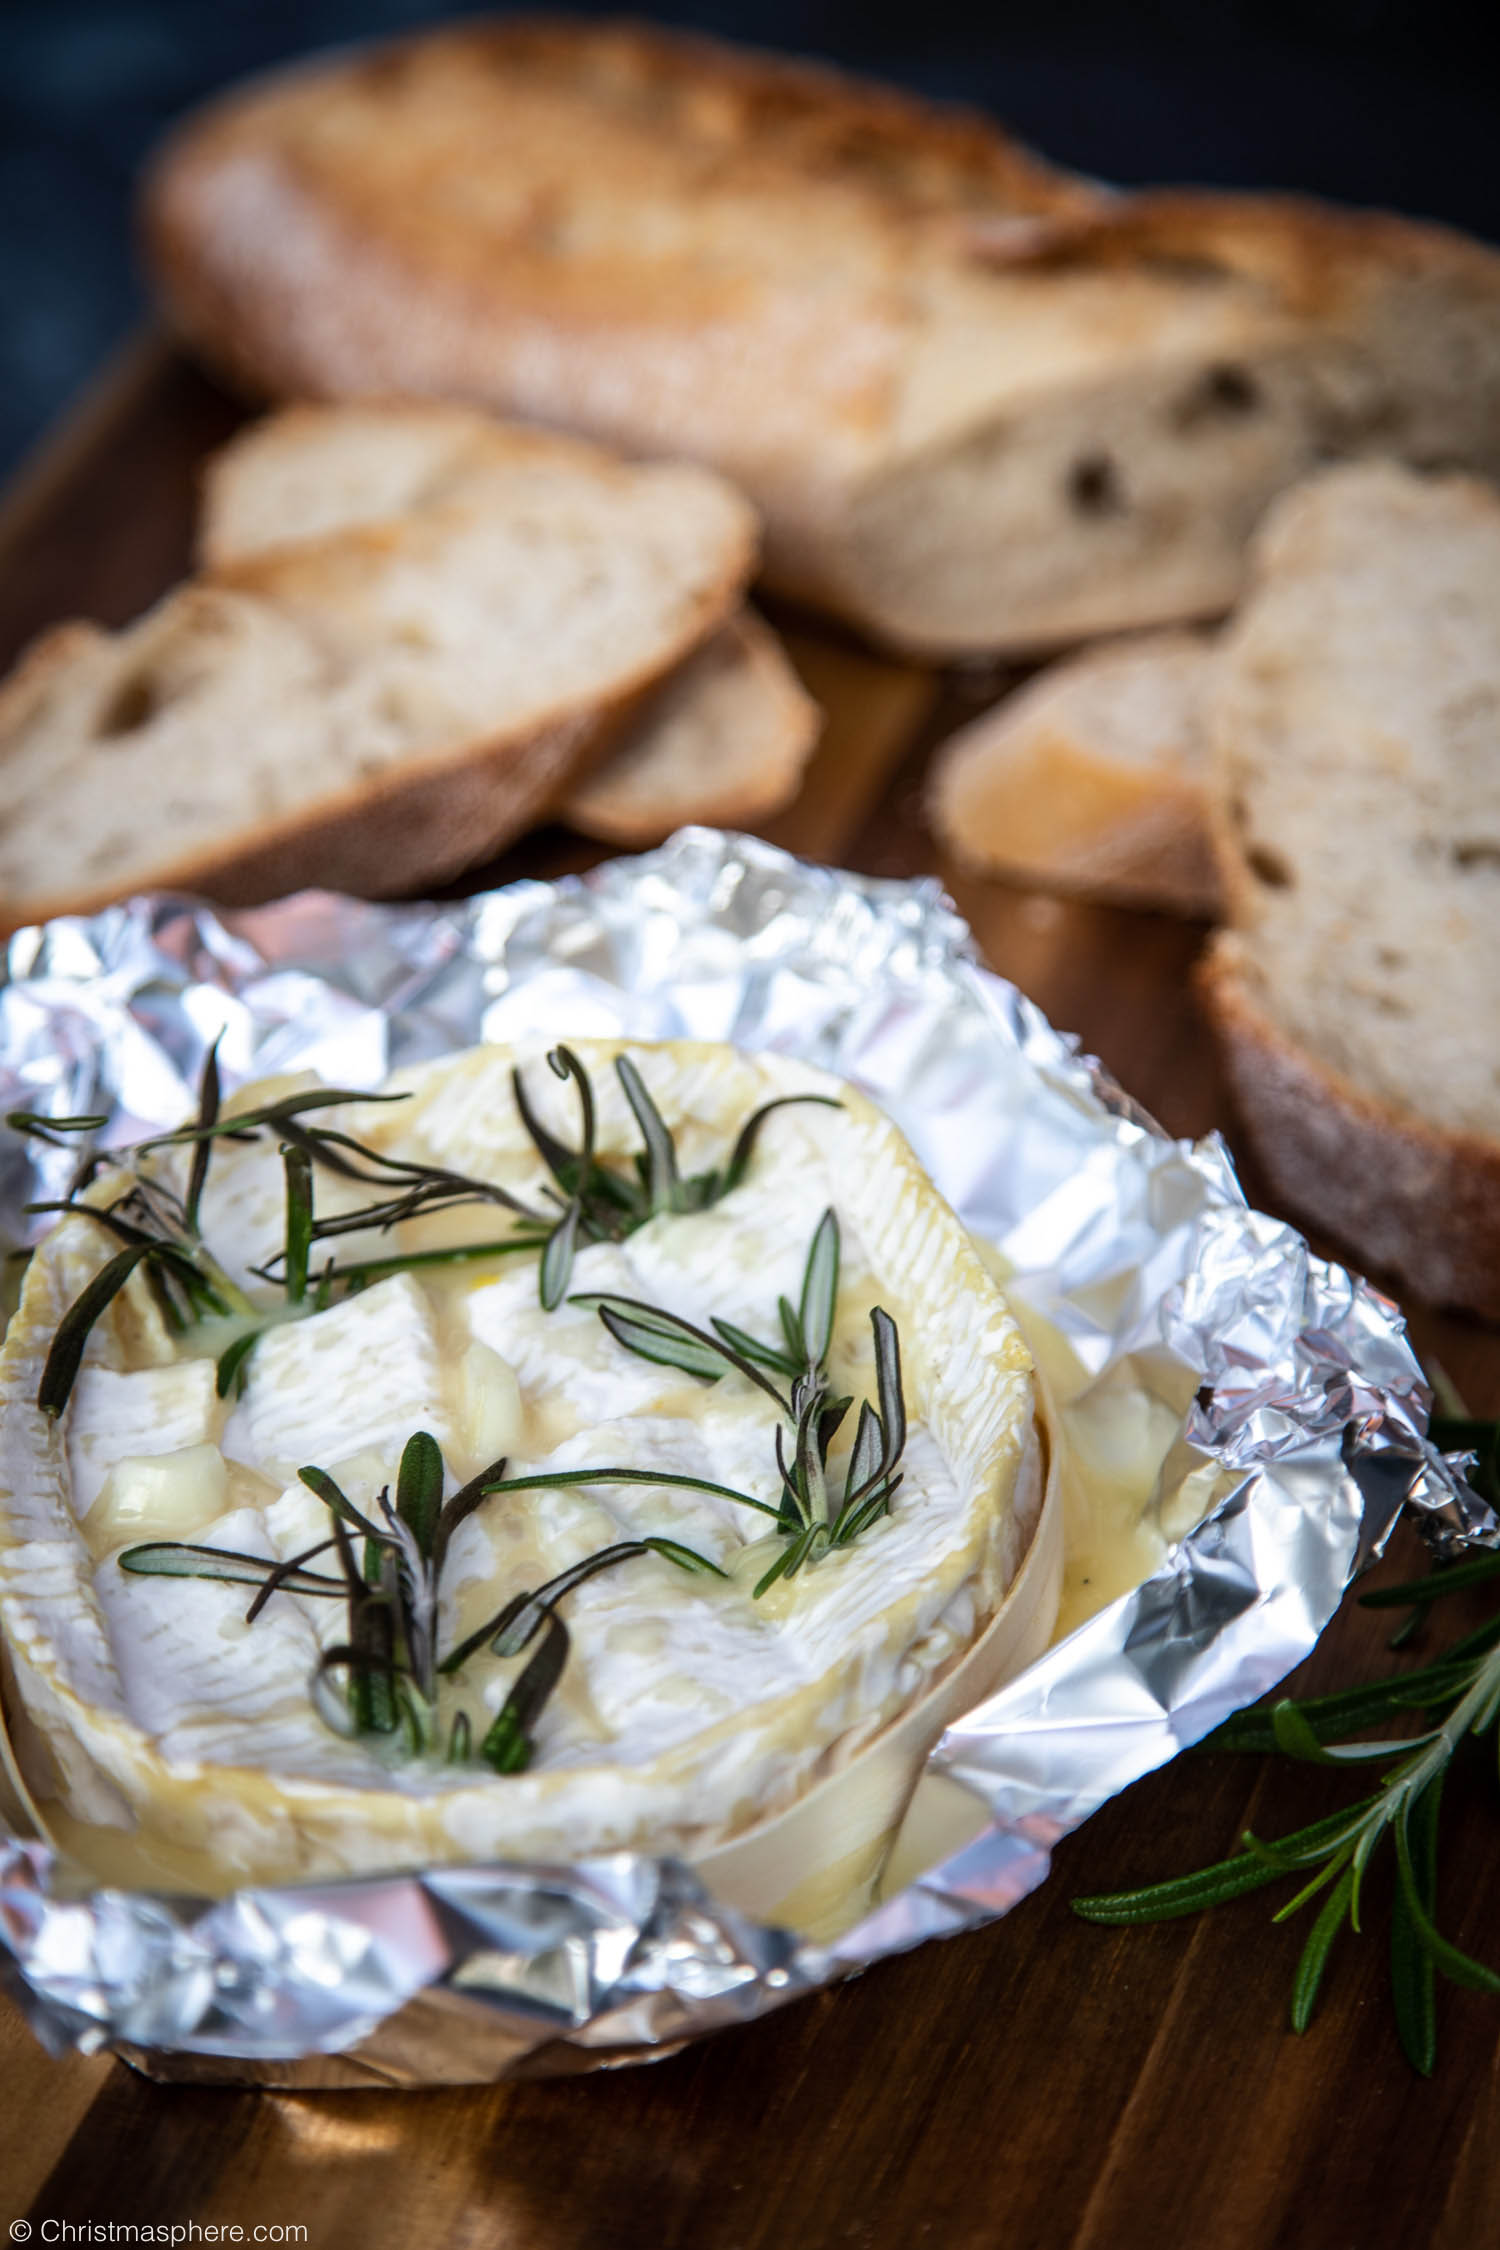 How To Make Baked Camembert | Deliciously gooey melted cheese appetiser